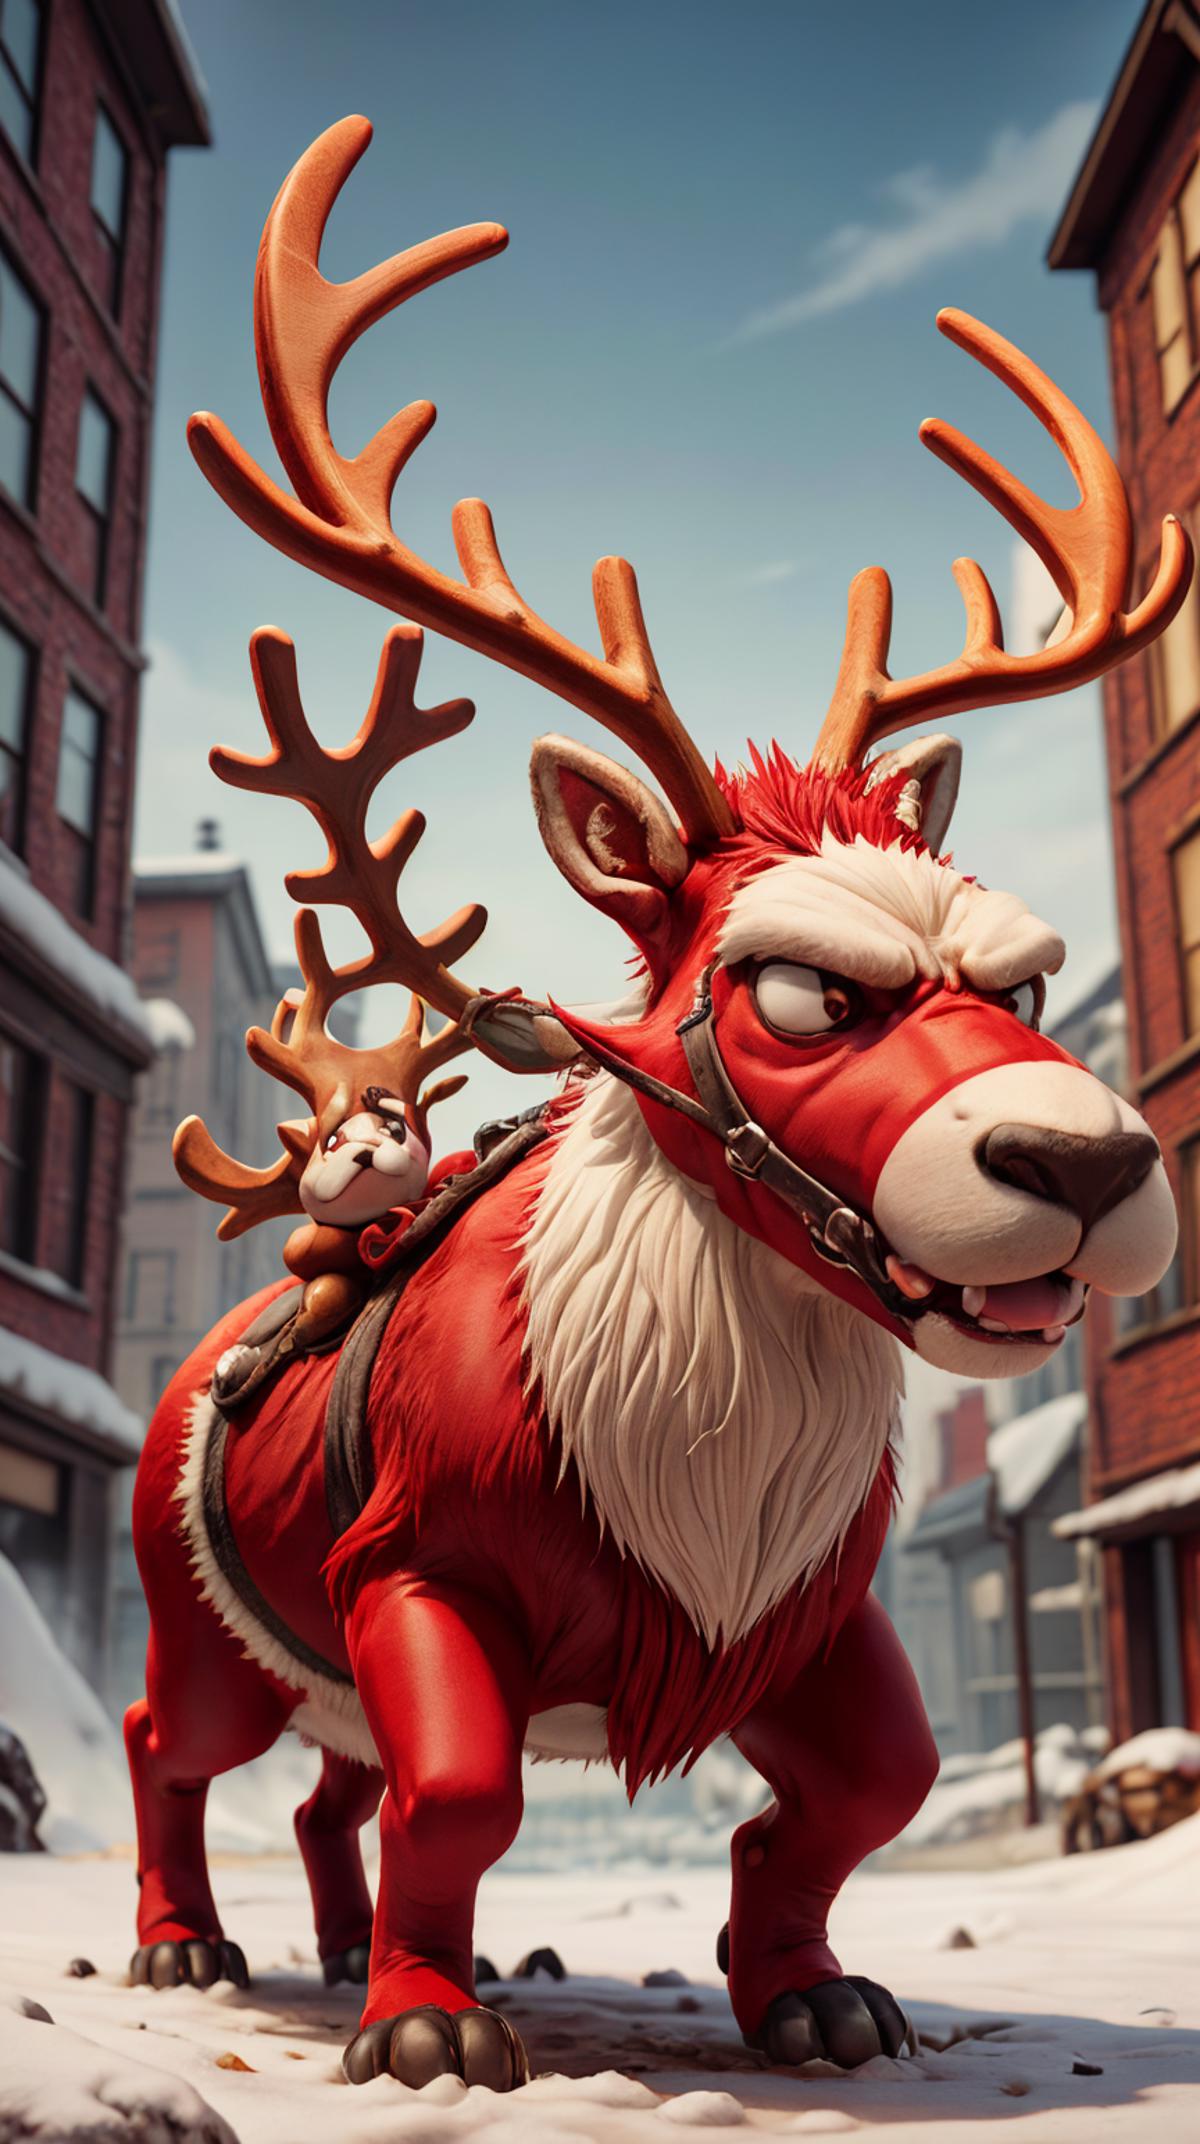 Animated Christmas reindeer with a red and white face and large antlers.